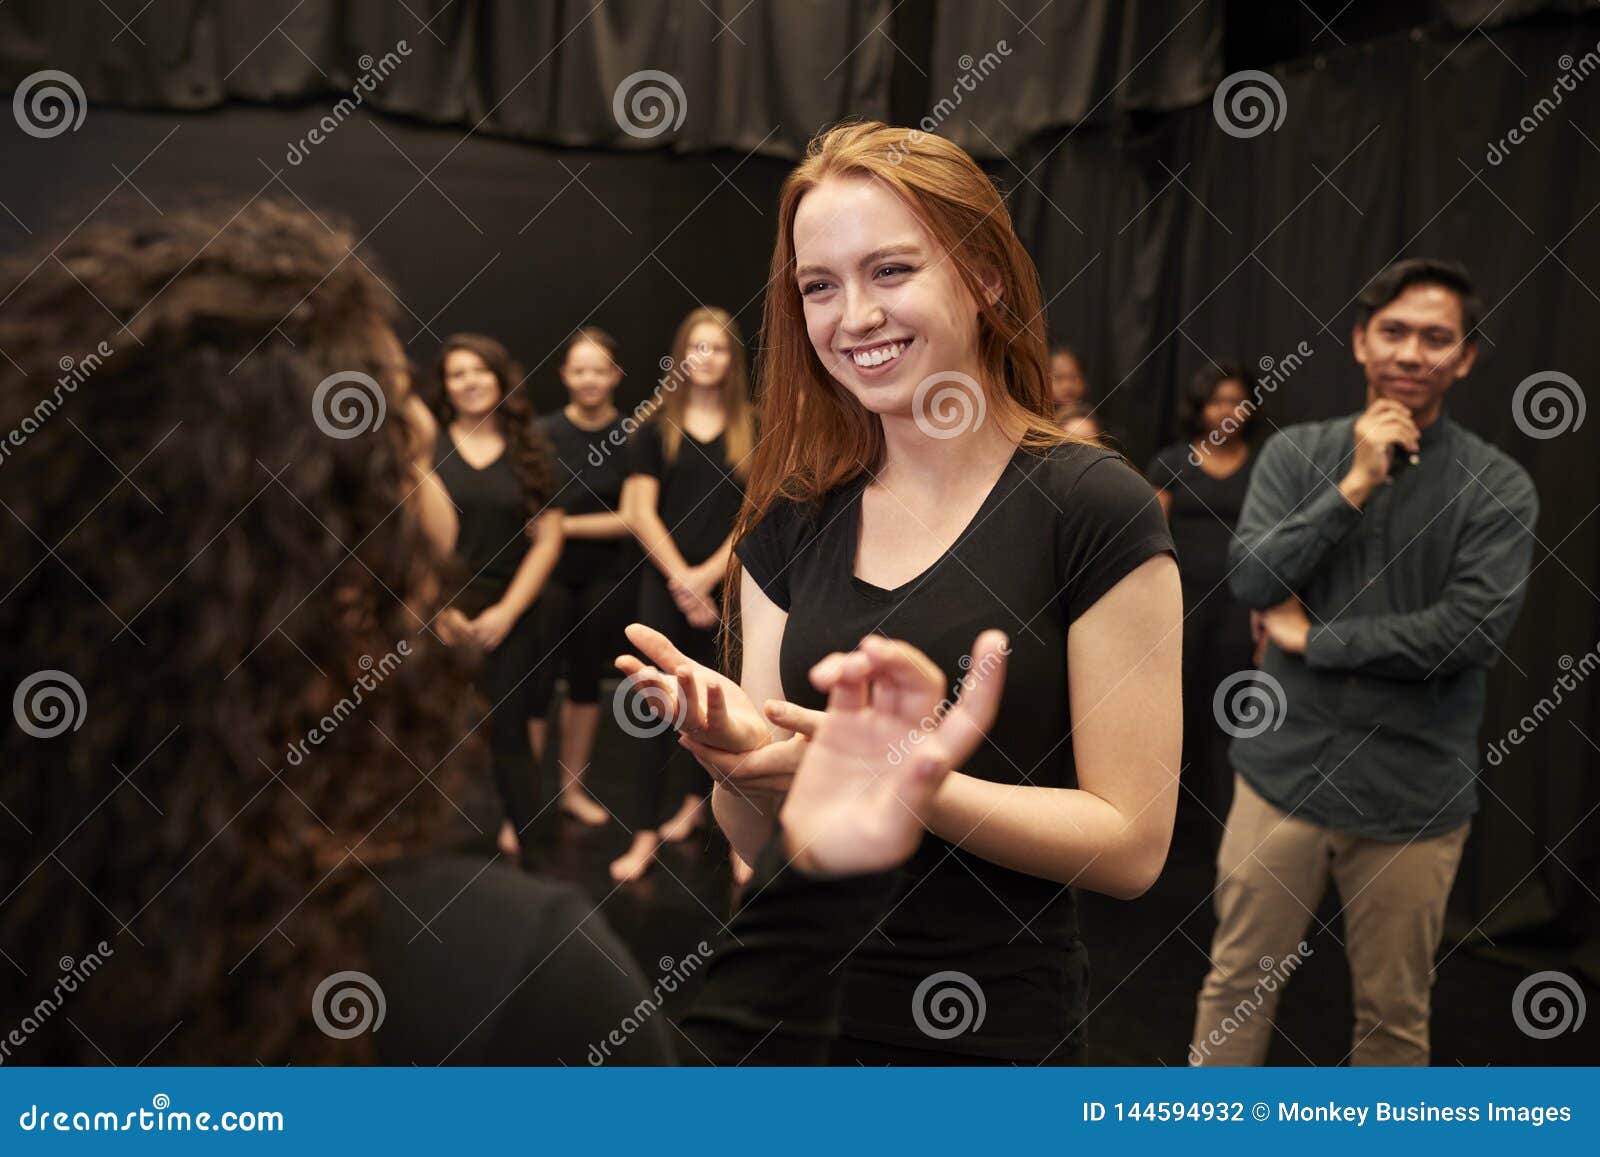 teacher with male and female drama students at performing arts school in studio improvisation class